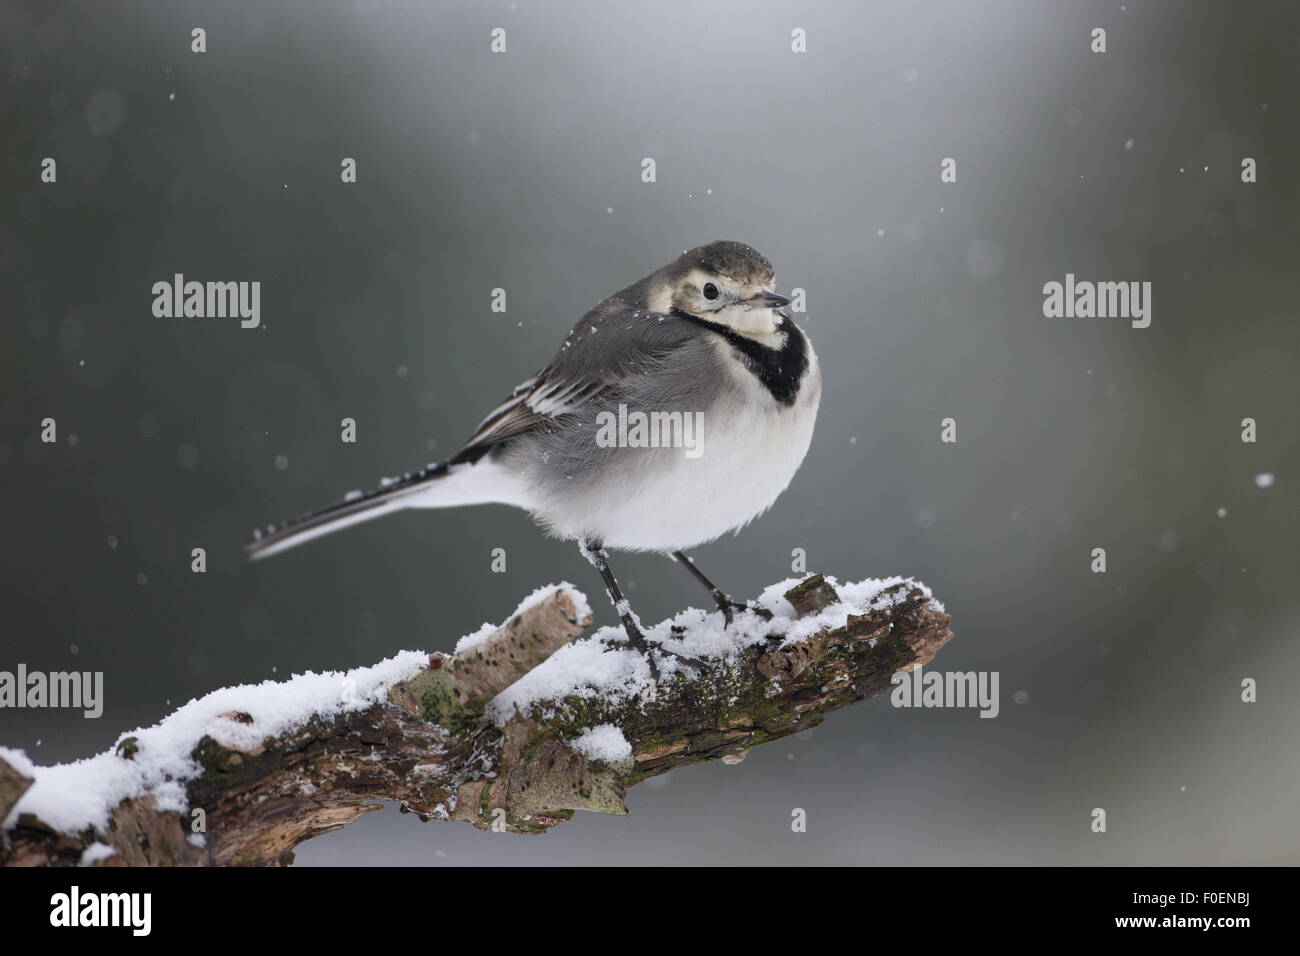 A pied wagtail perched on a branch in the snow Stock Photo